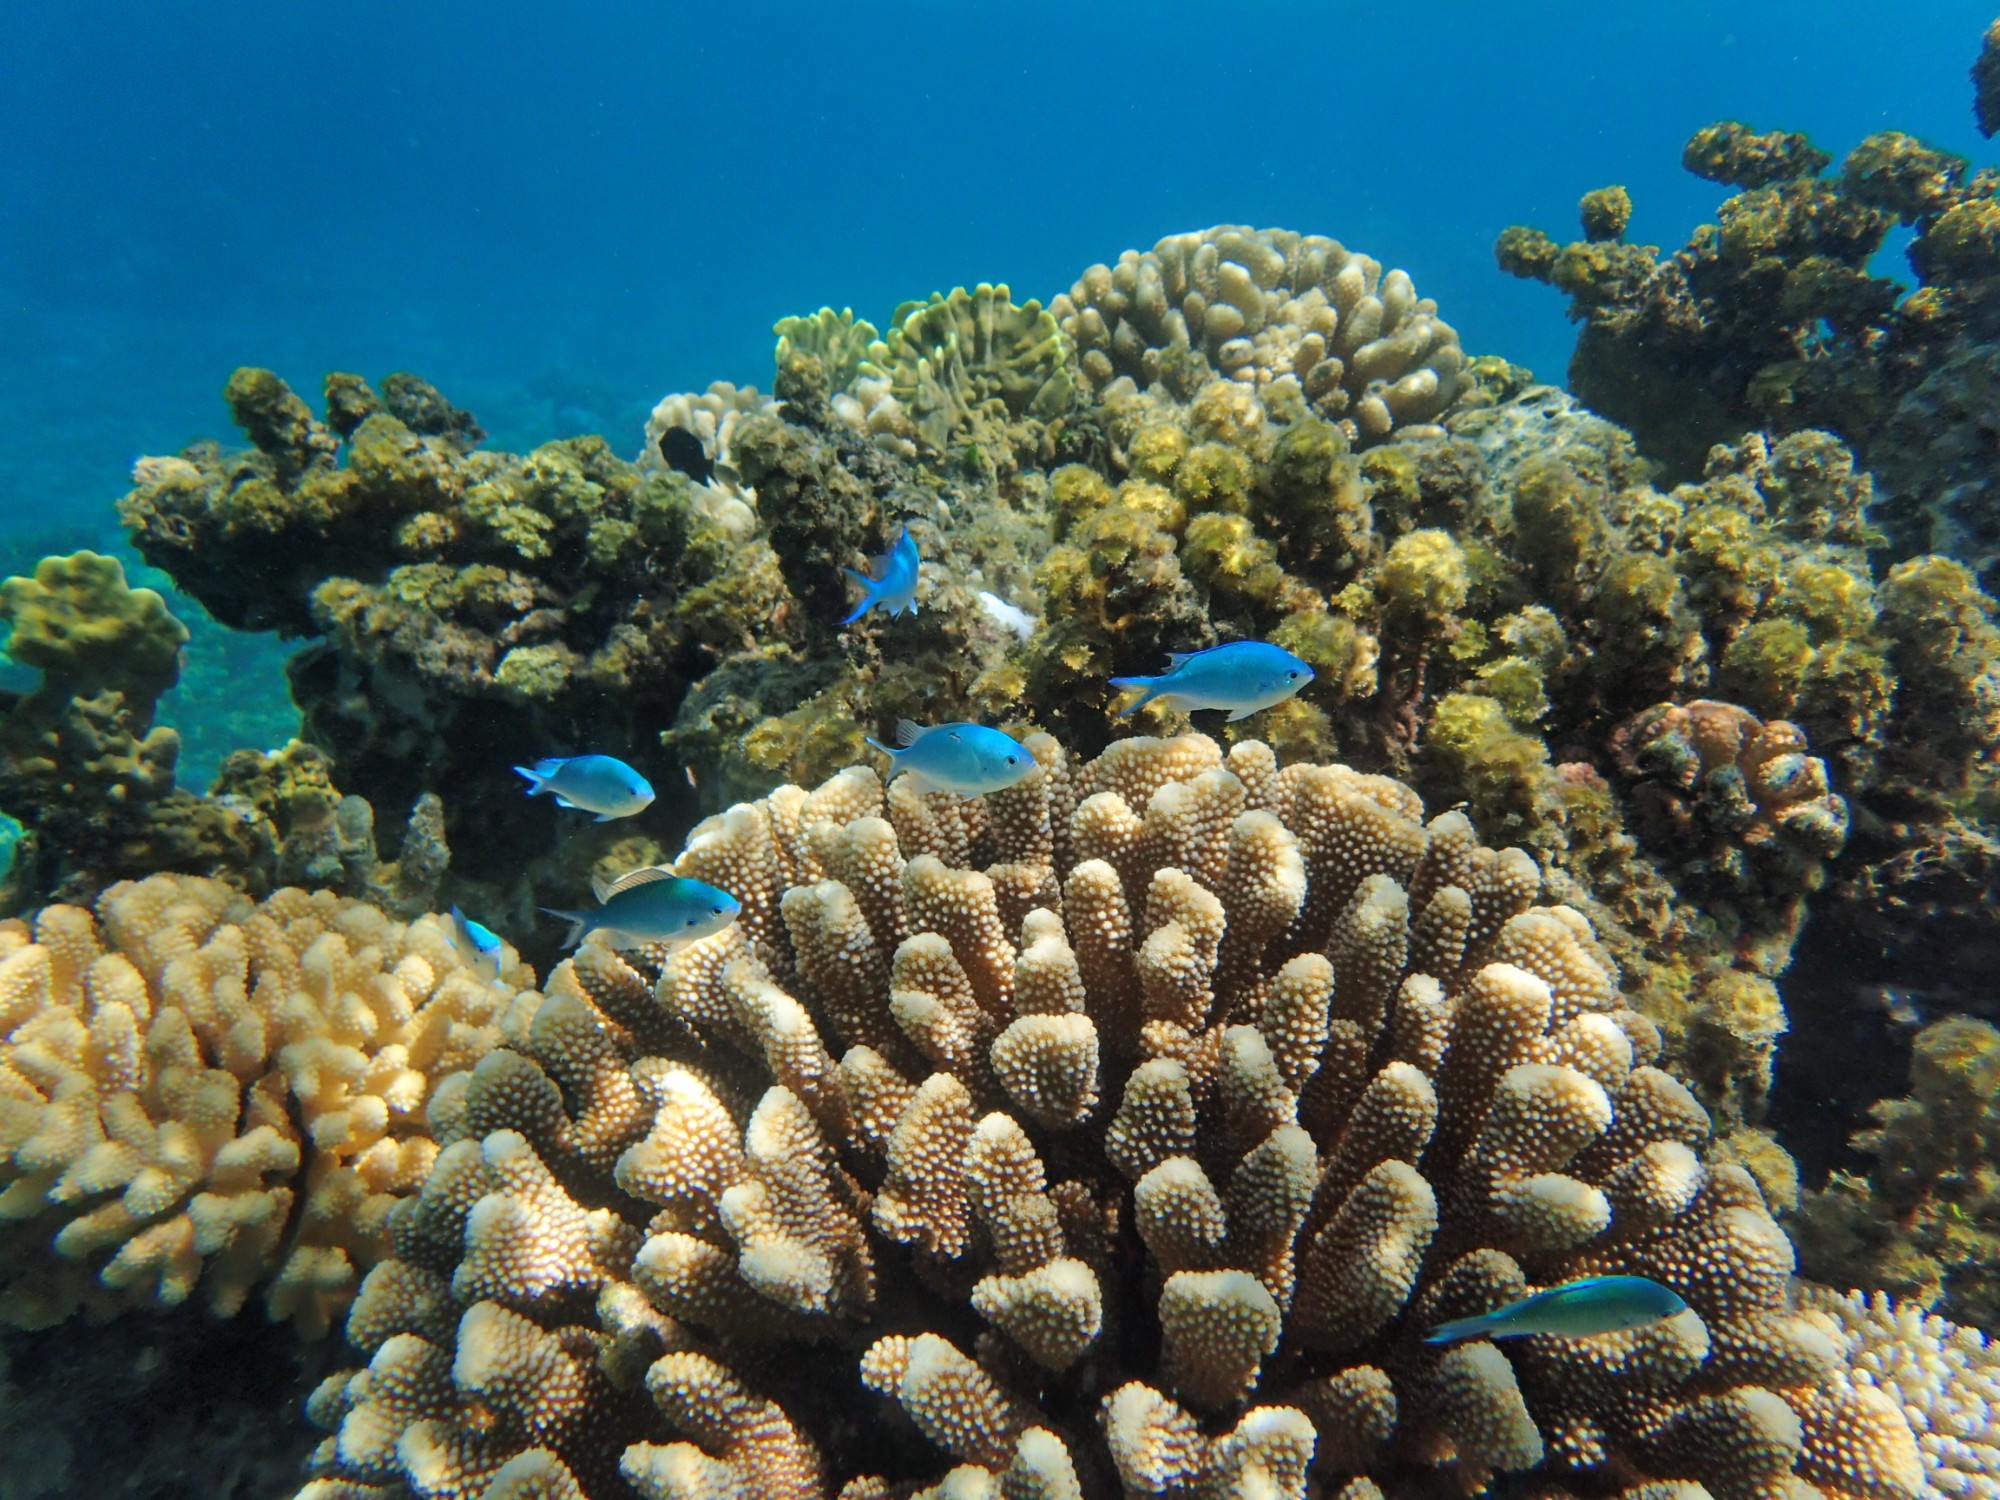 Coral Reef of Papeari, French Polynesia